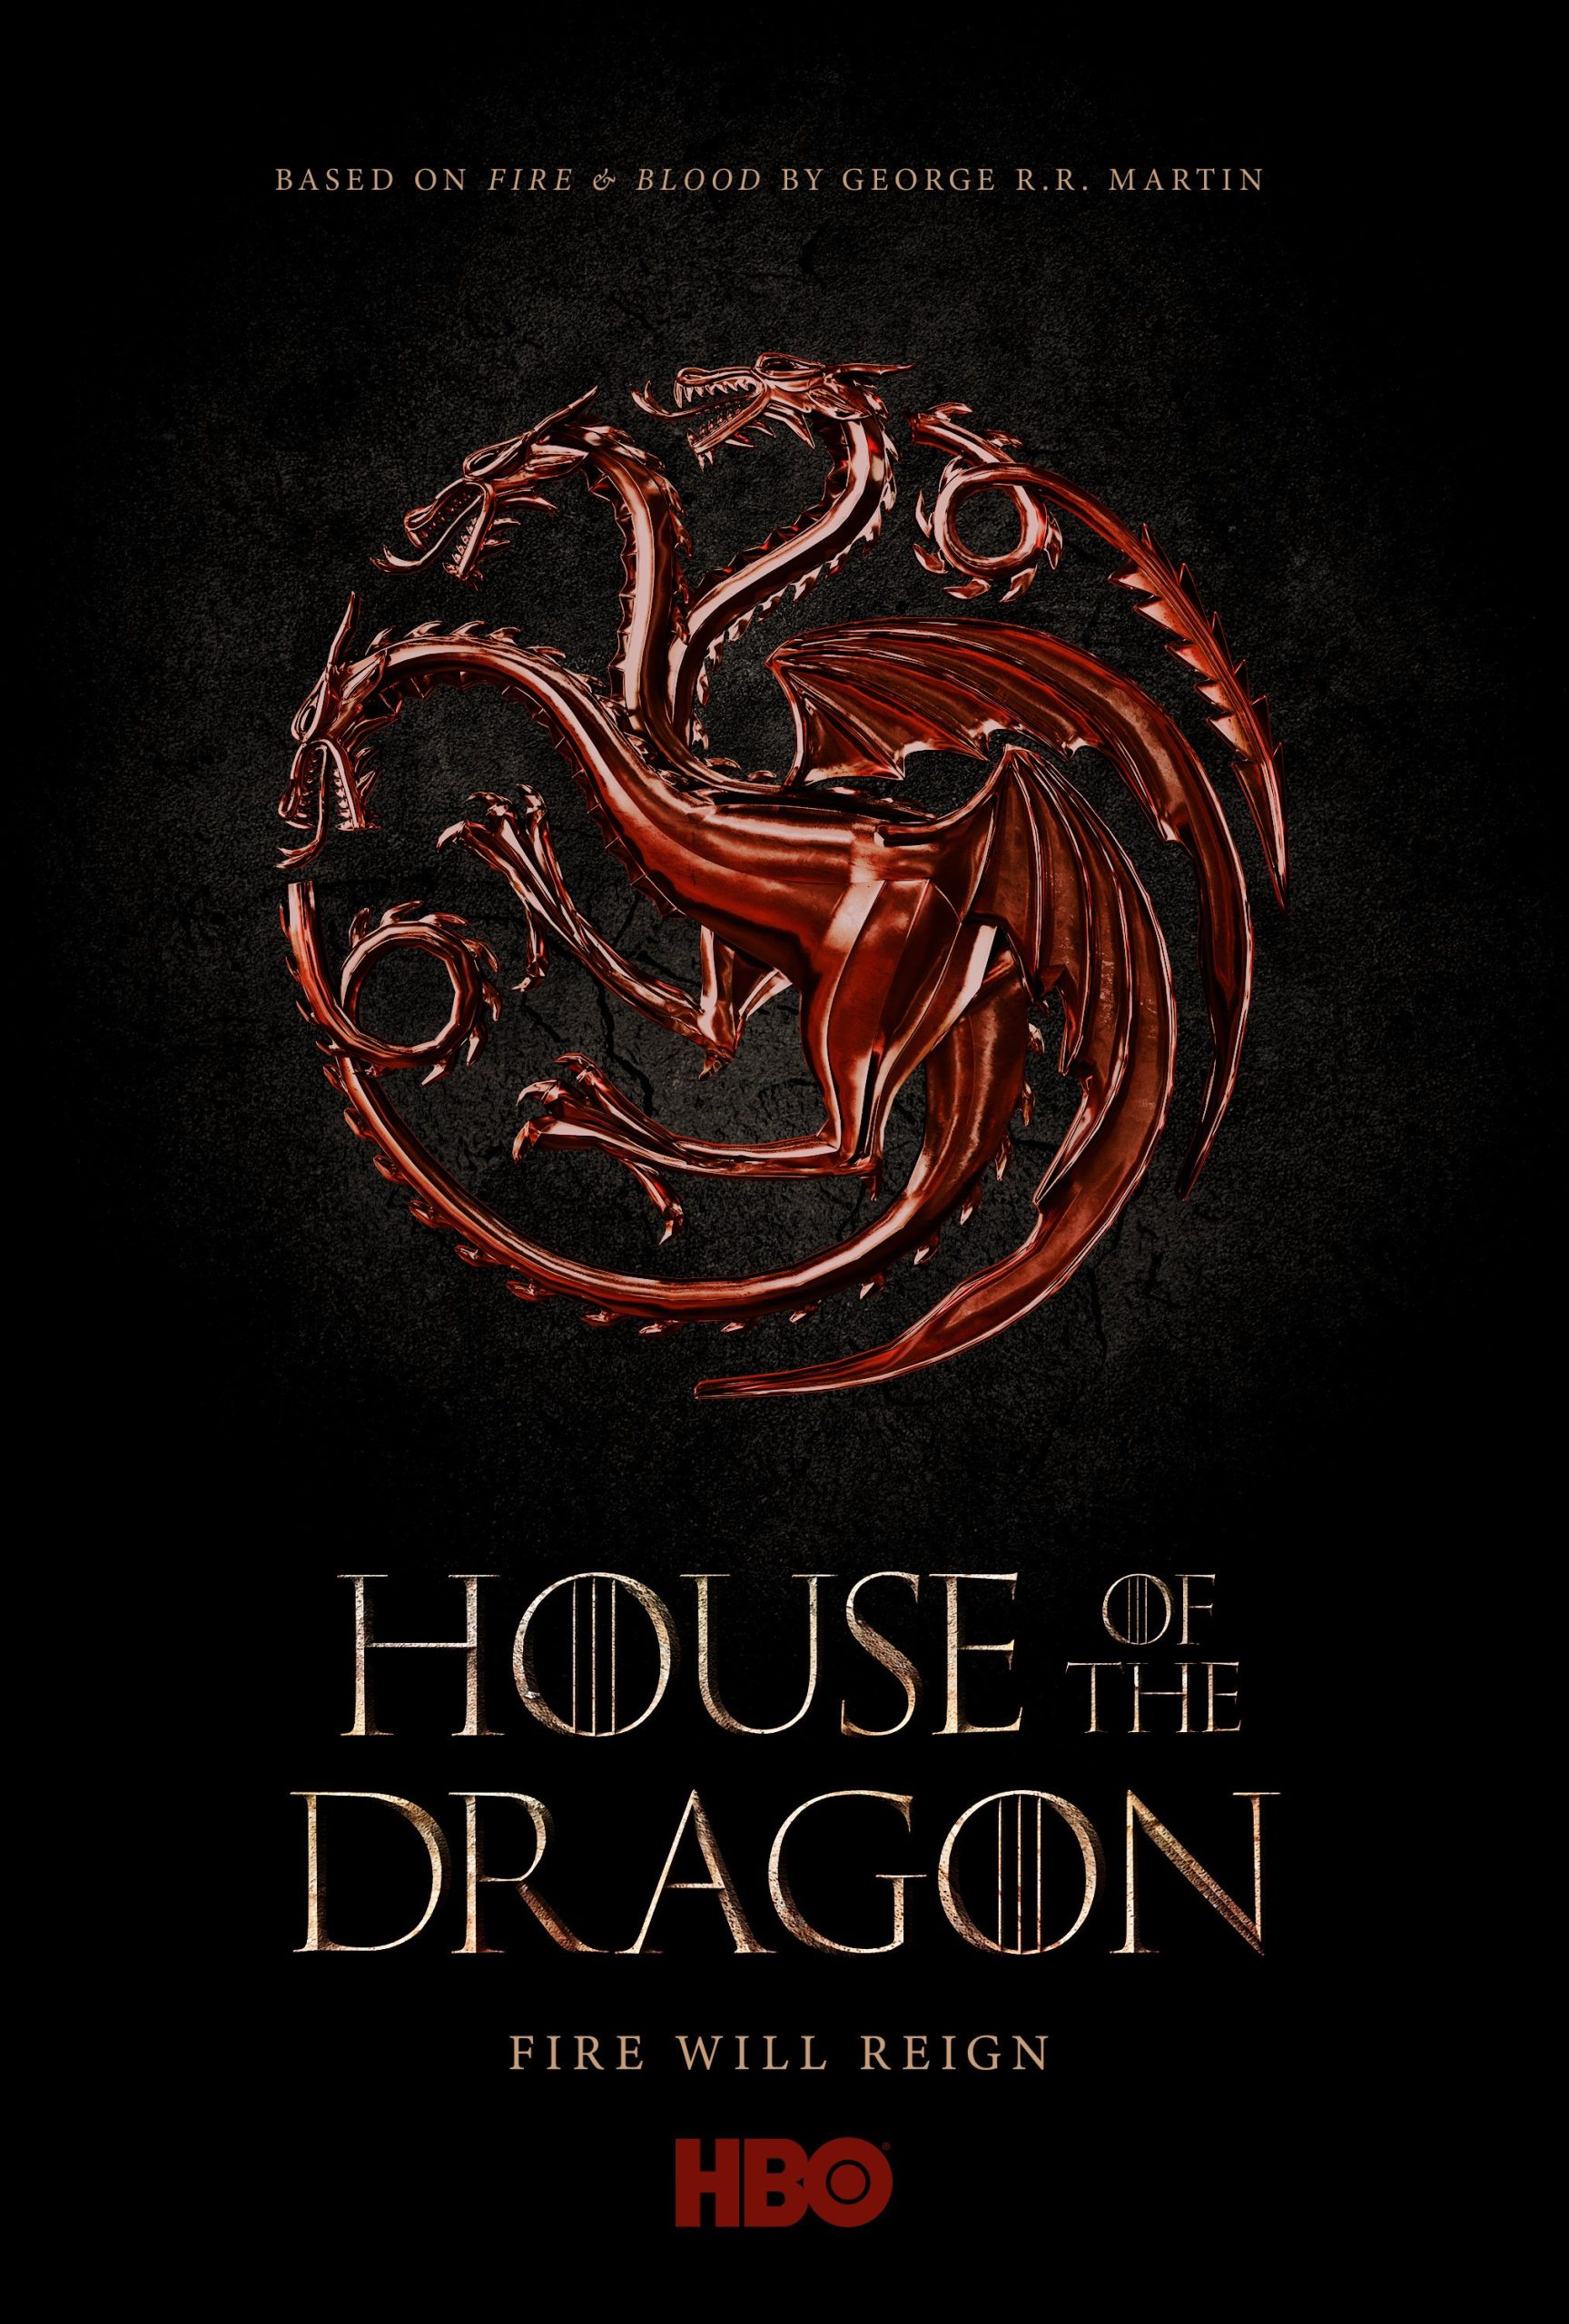 HBO reveals new Game of Thrones spinoff House of the Dragon SideQuesting